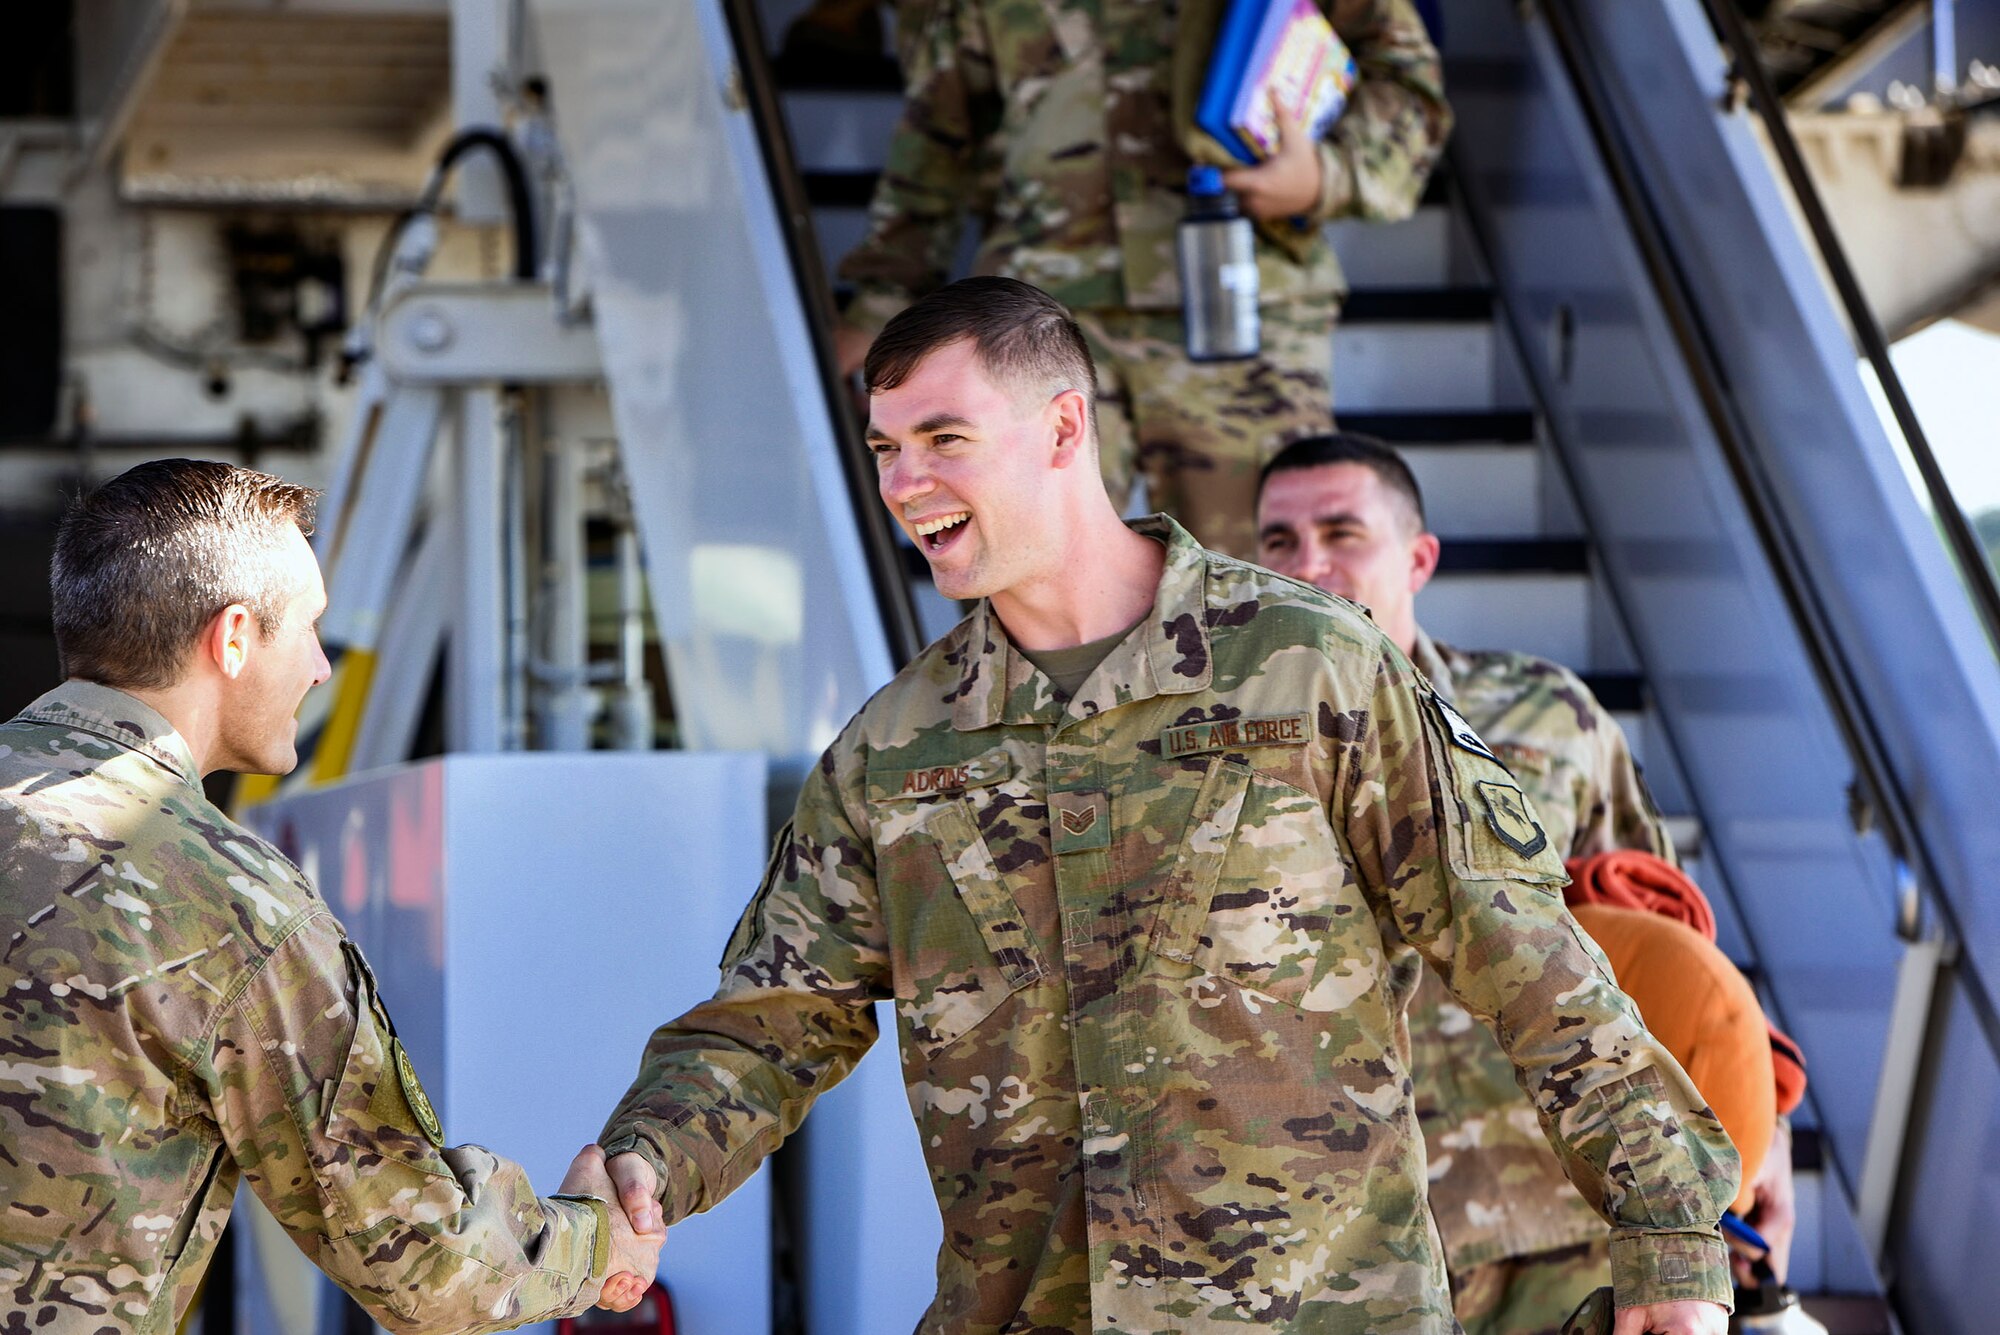 Staff Sgt. Scott Adkins, right, 723d Aircraft Maintenance Squadron aircraft armament specialist, is welcomed home by Col. Justin Demarco, 23d Wing vice commander, during the 41st Rescue Squadron’s redeployment ceremony, July 10, 2018, at Moody Air Force Base, Ga. While deployed, the 41st RQS and 41st Helicopter Maintenance Unit provided combat search and rescue capabilities and maintenance operations in support of Combined Joint Task Force-Horn of Africa. (U.S Air Force photo by Senior Airman Greg Nash)